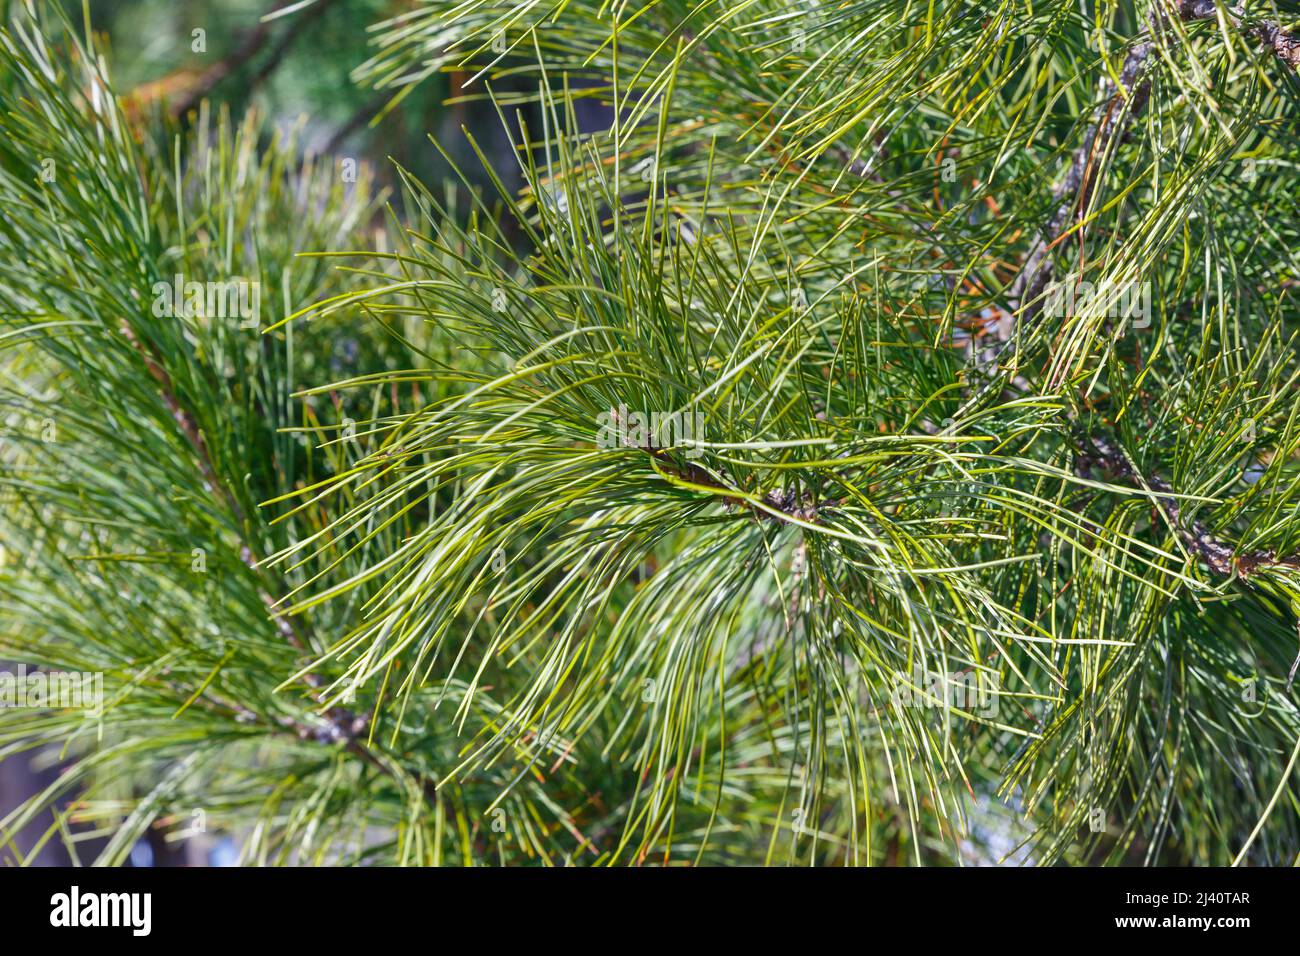 Siberian pine or Pinus sibirica, branches with long green fluffy needles Stock Photo